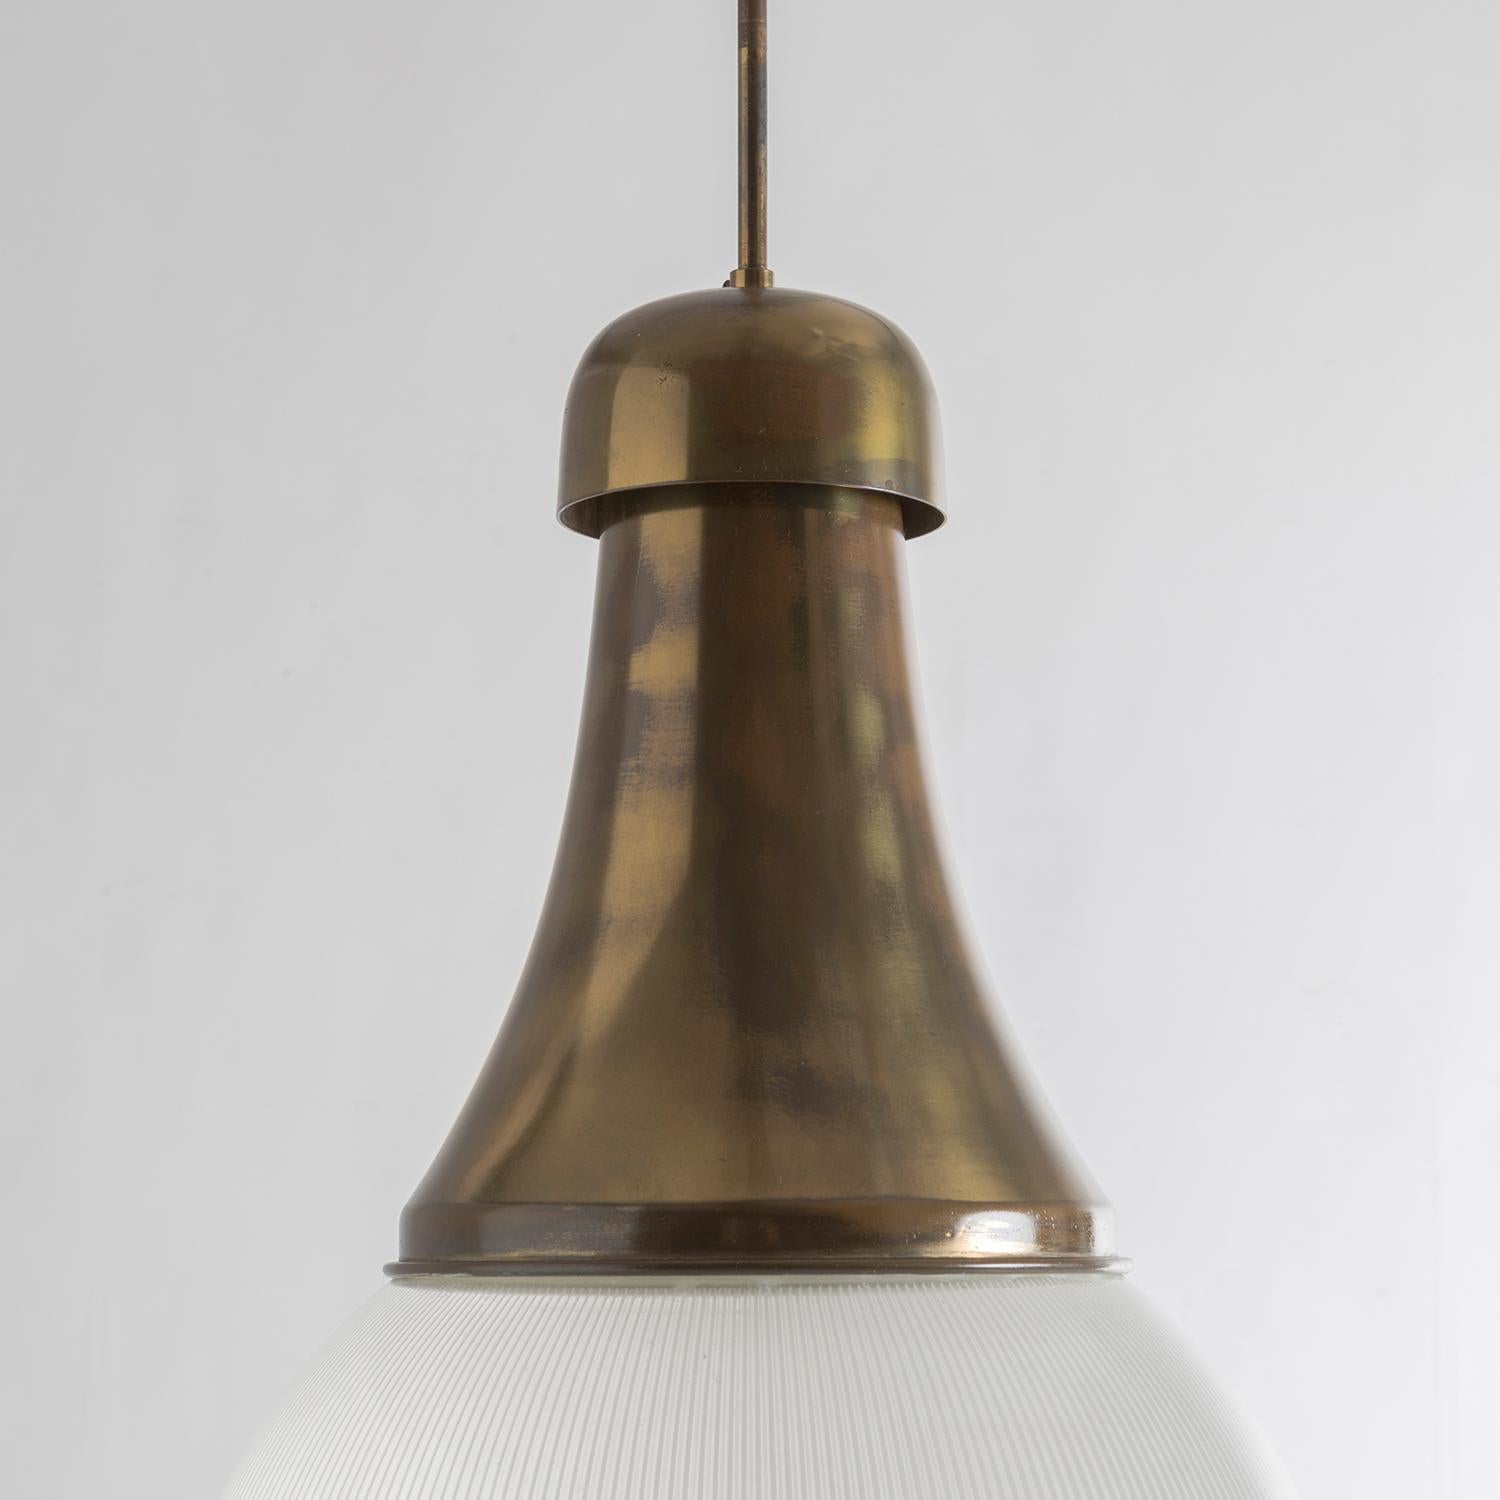 Elegant brass and molded glass pendant that appears to be a variation of the model designed by Tito Agnoli for O-Luce, excellent patina and good overall condition.